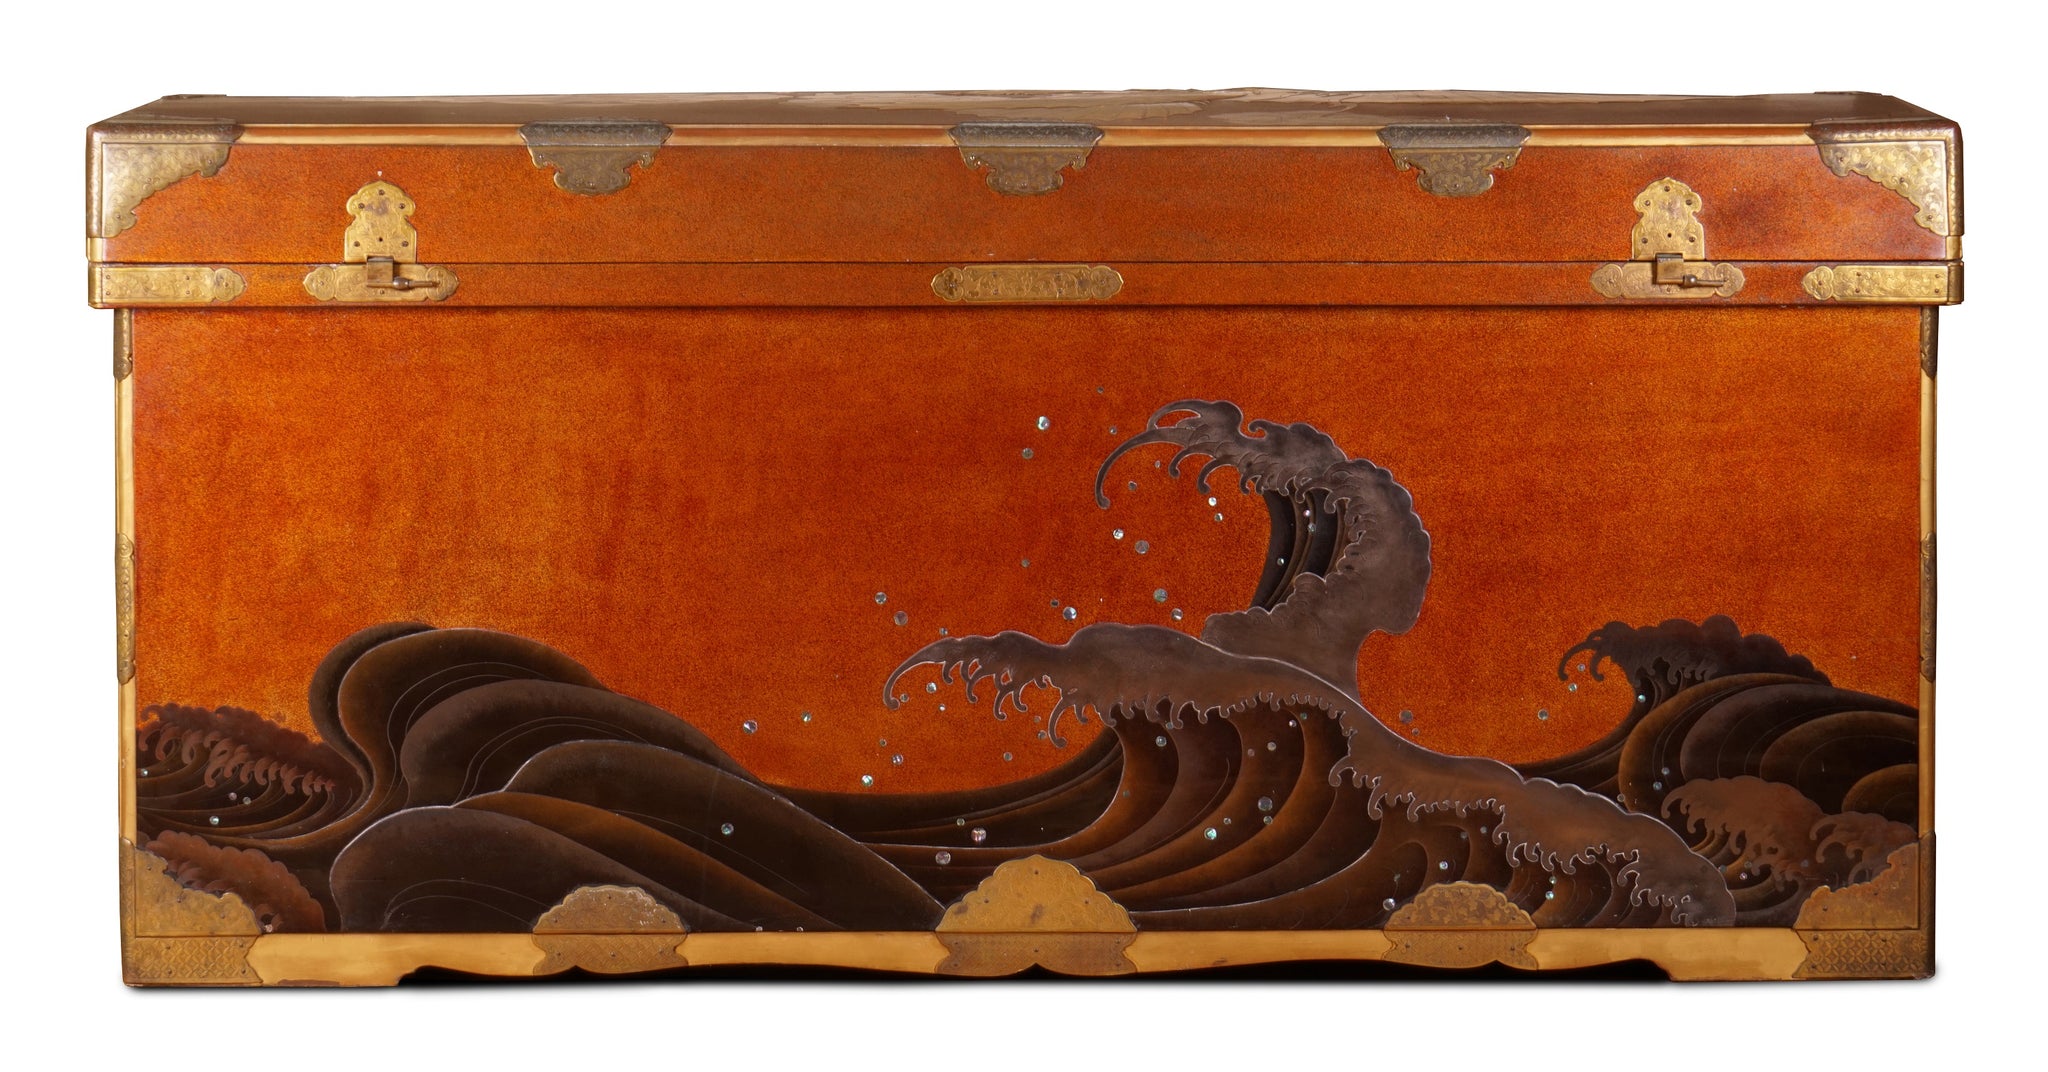 The Great Wave Trunk